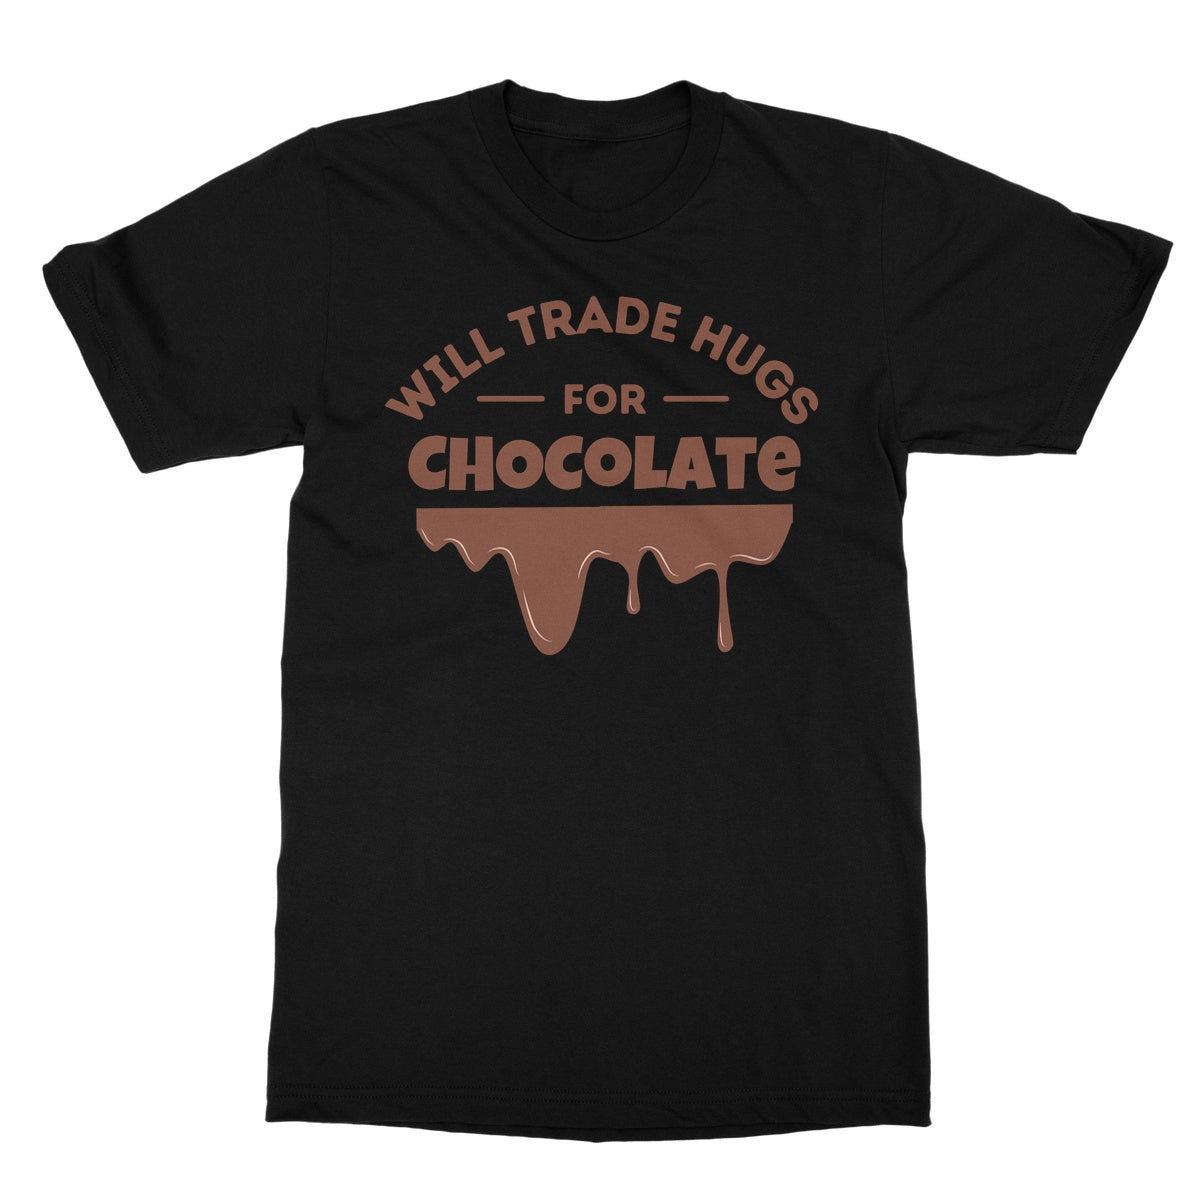 will trade hugs for chocolate t shirt black